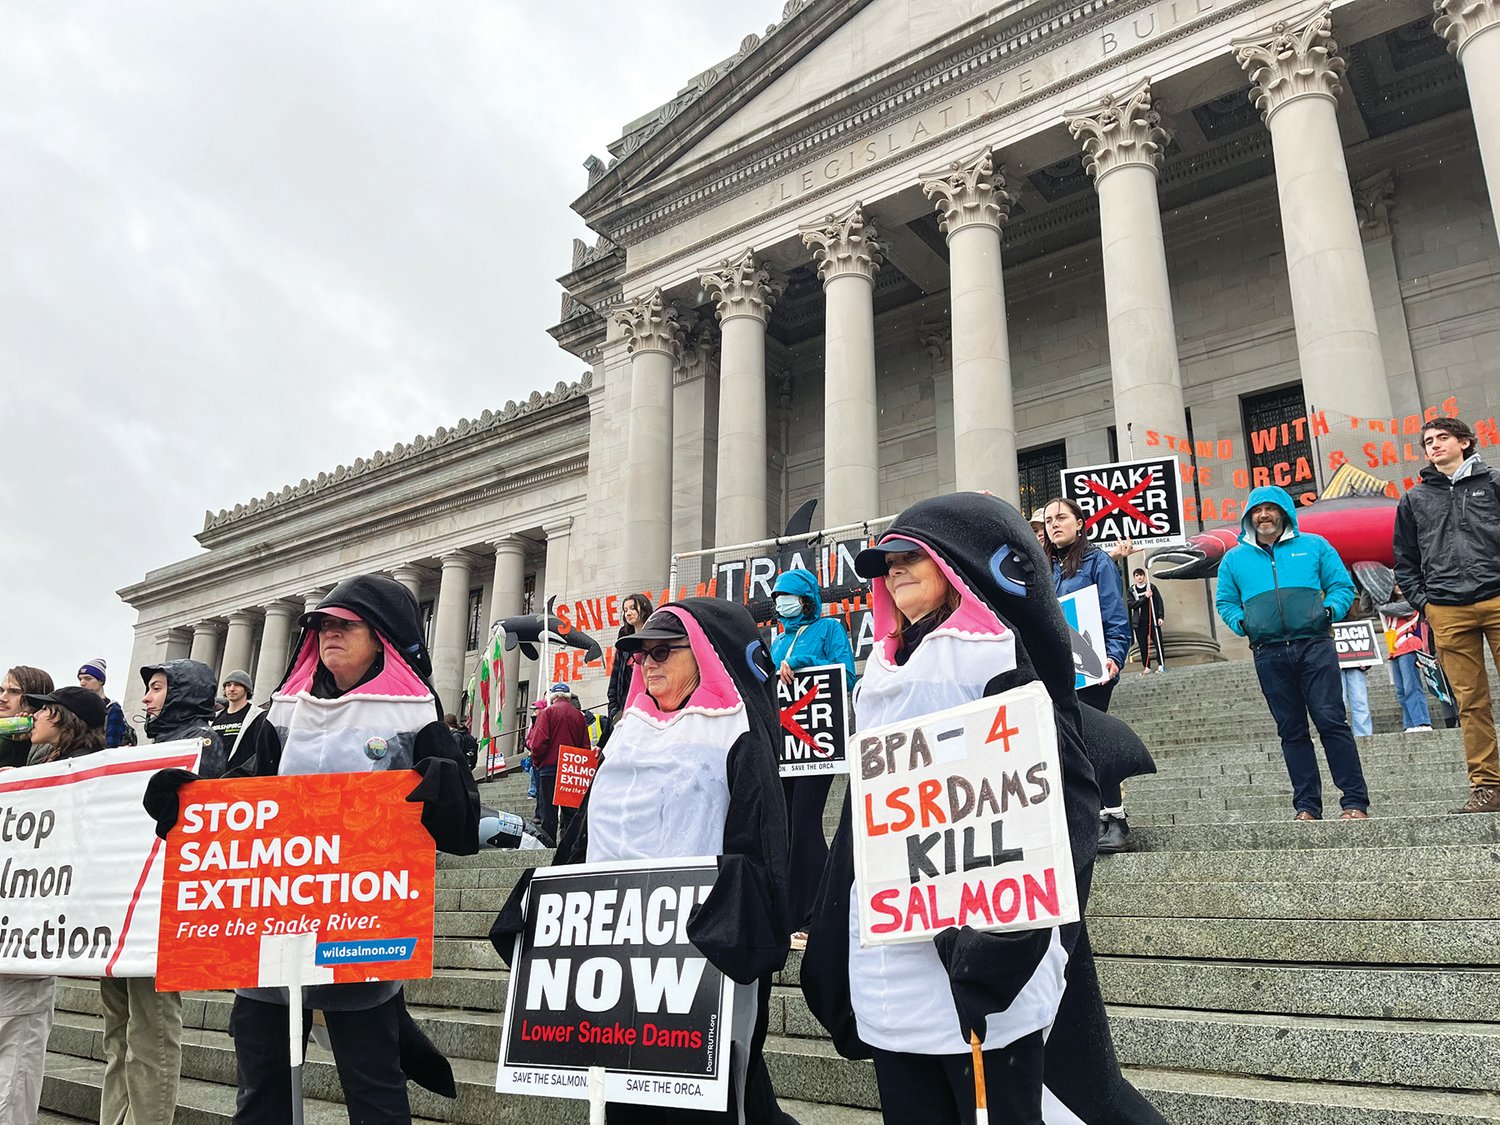 Members of the Washington Youth Ocean and River Conservation Alliance and Earth Ministry Washington Interfaith Power & Light marched from The Olympia Ballroom to the steps of the Capitol on Jan. 13.